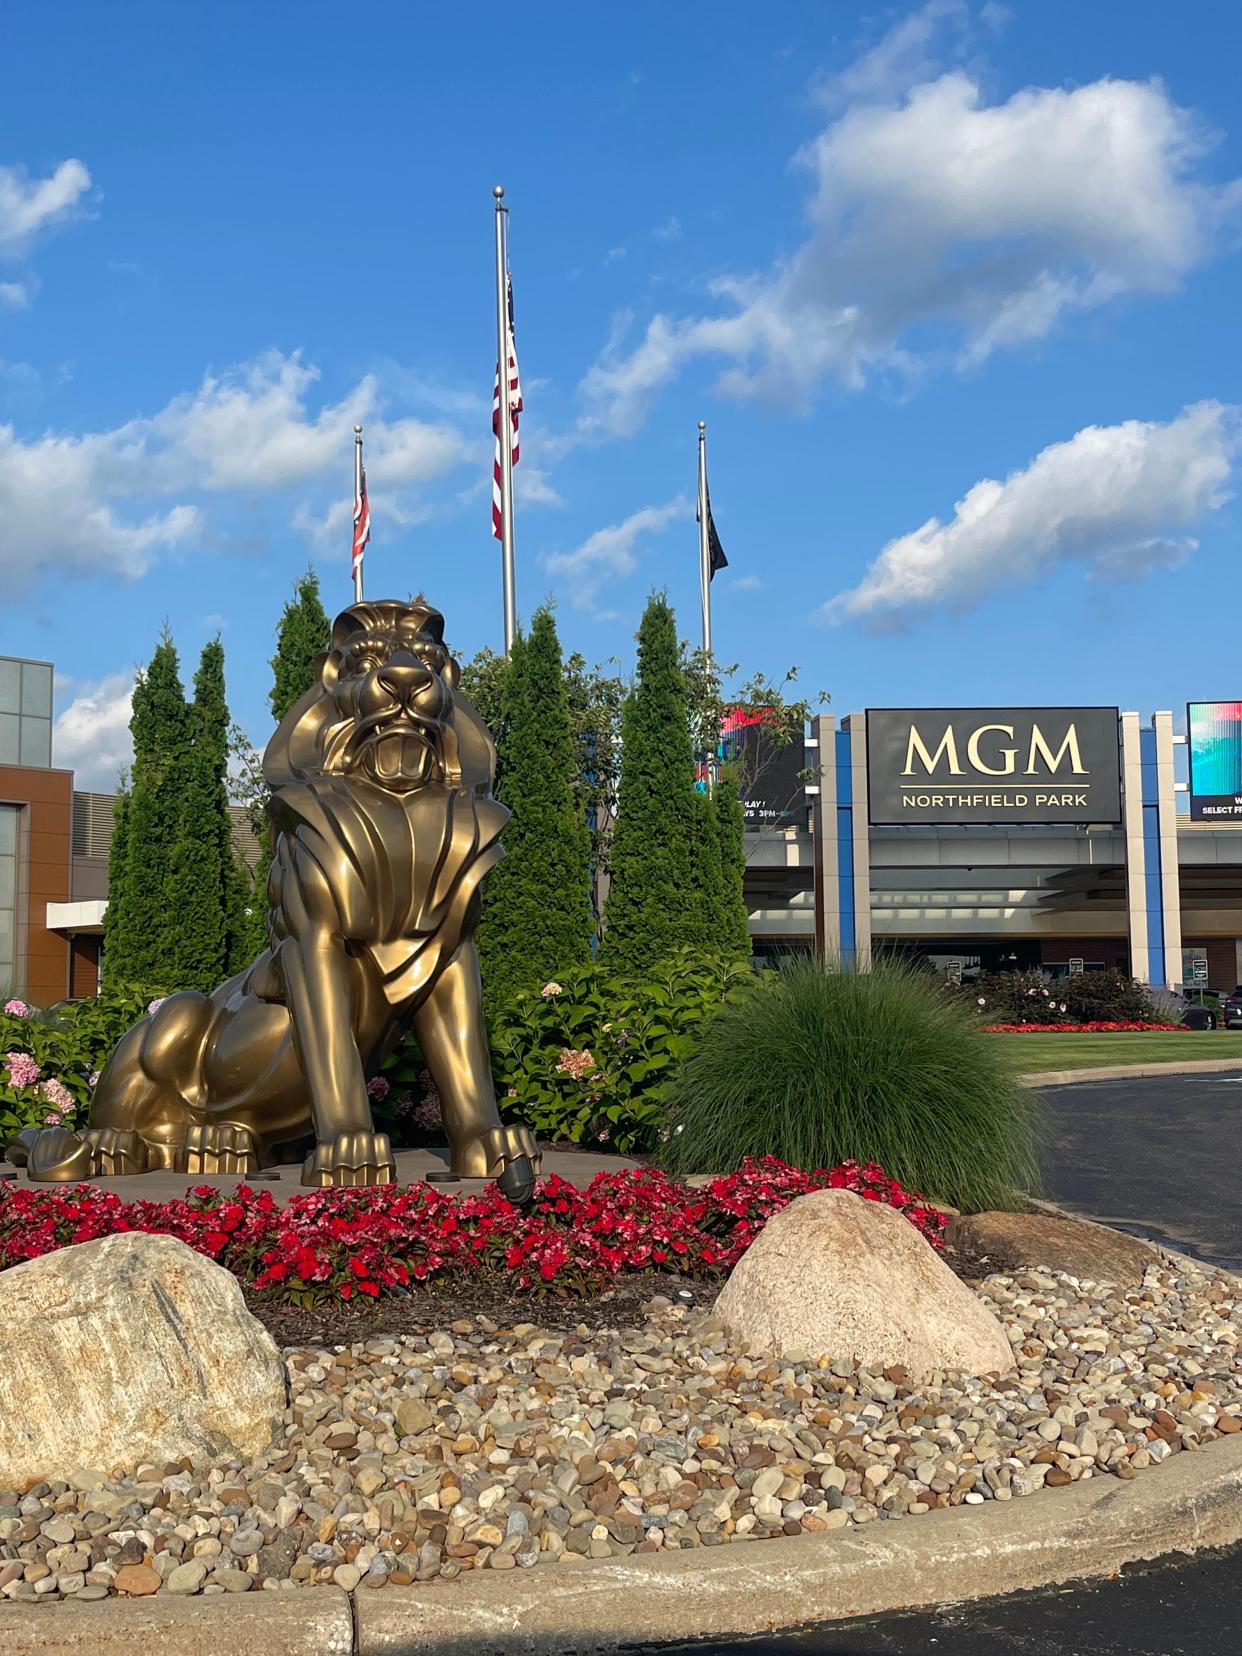 MGM Northfield Park is open for business following a companywide cybersecurity problem, but is holding on to jackpots, which it said will be paid to winners at a later date.